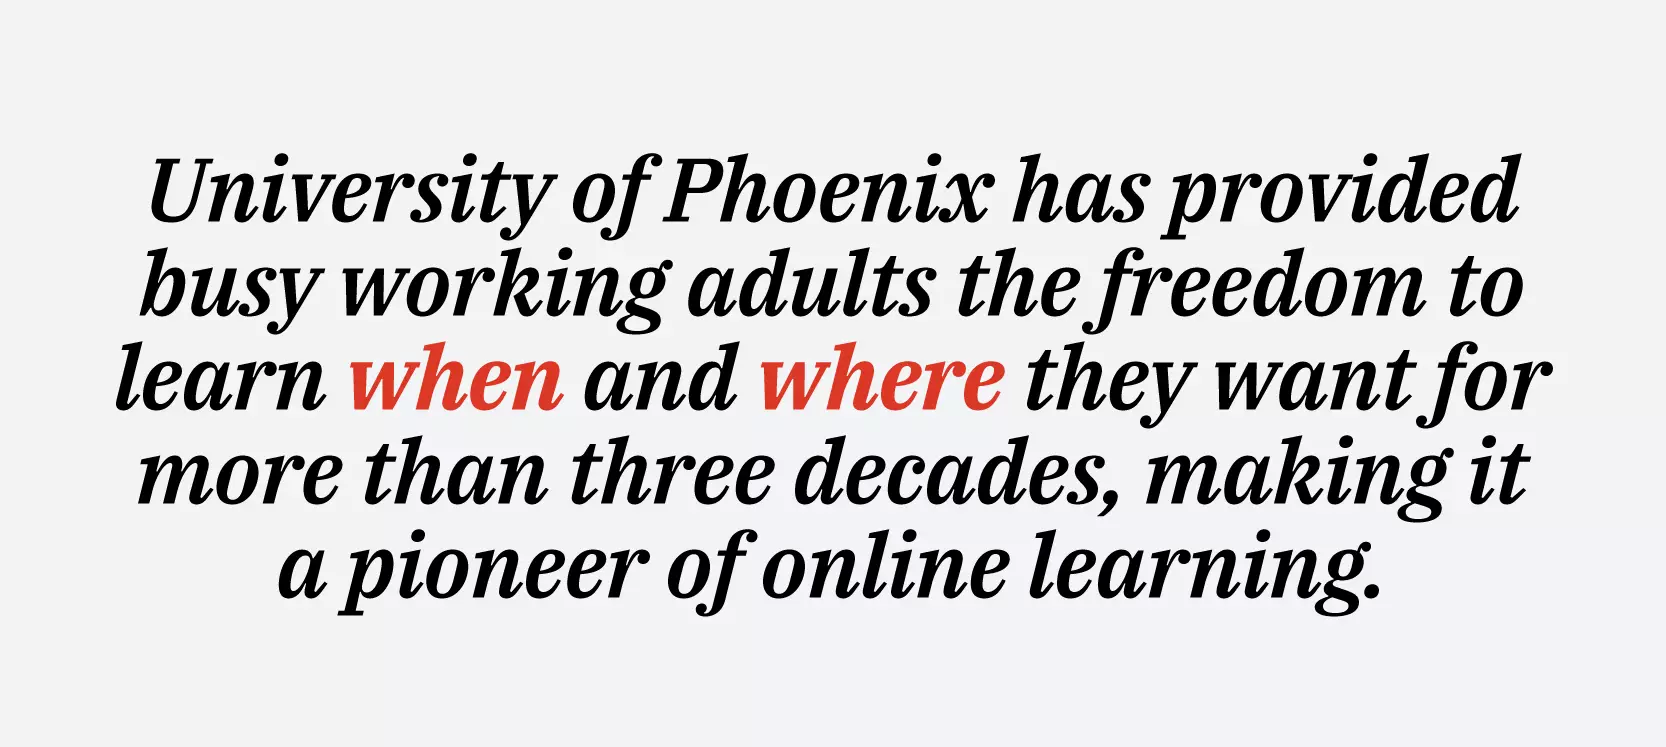 University of Phoenix has provided busy working adults the freedom to learn when and where they want for more than three decades, making it a pioneer of online learning.